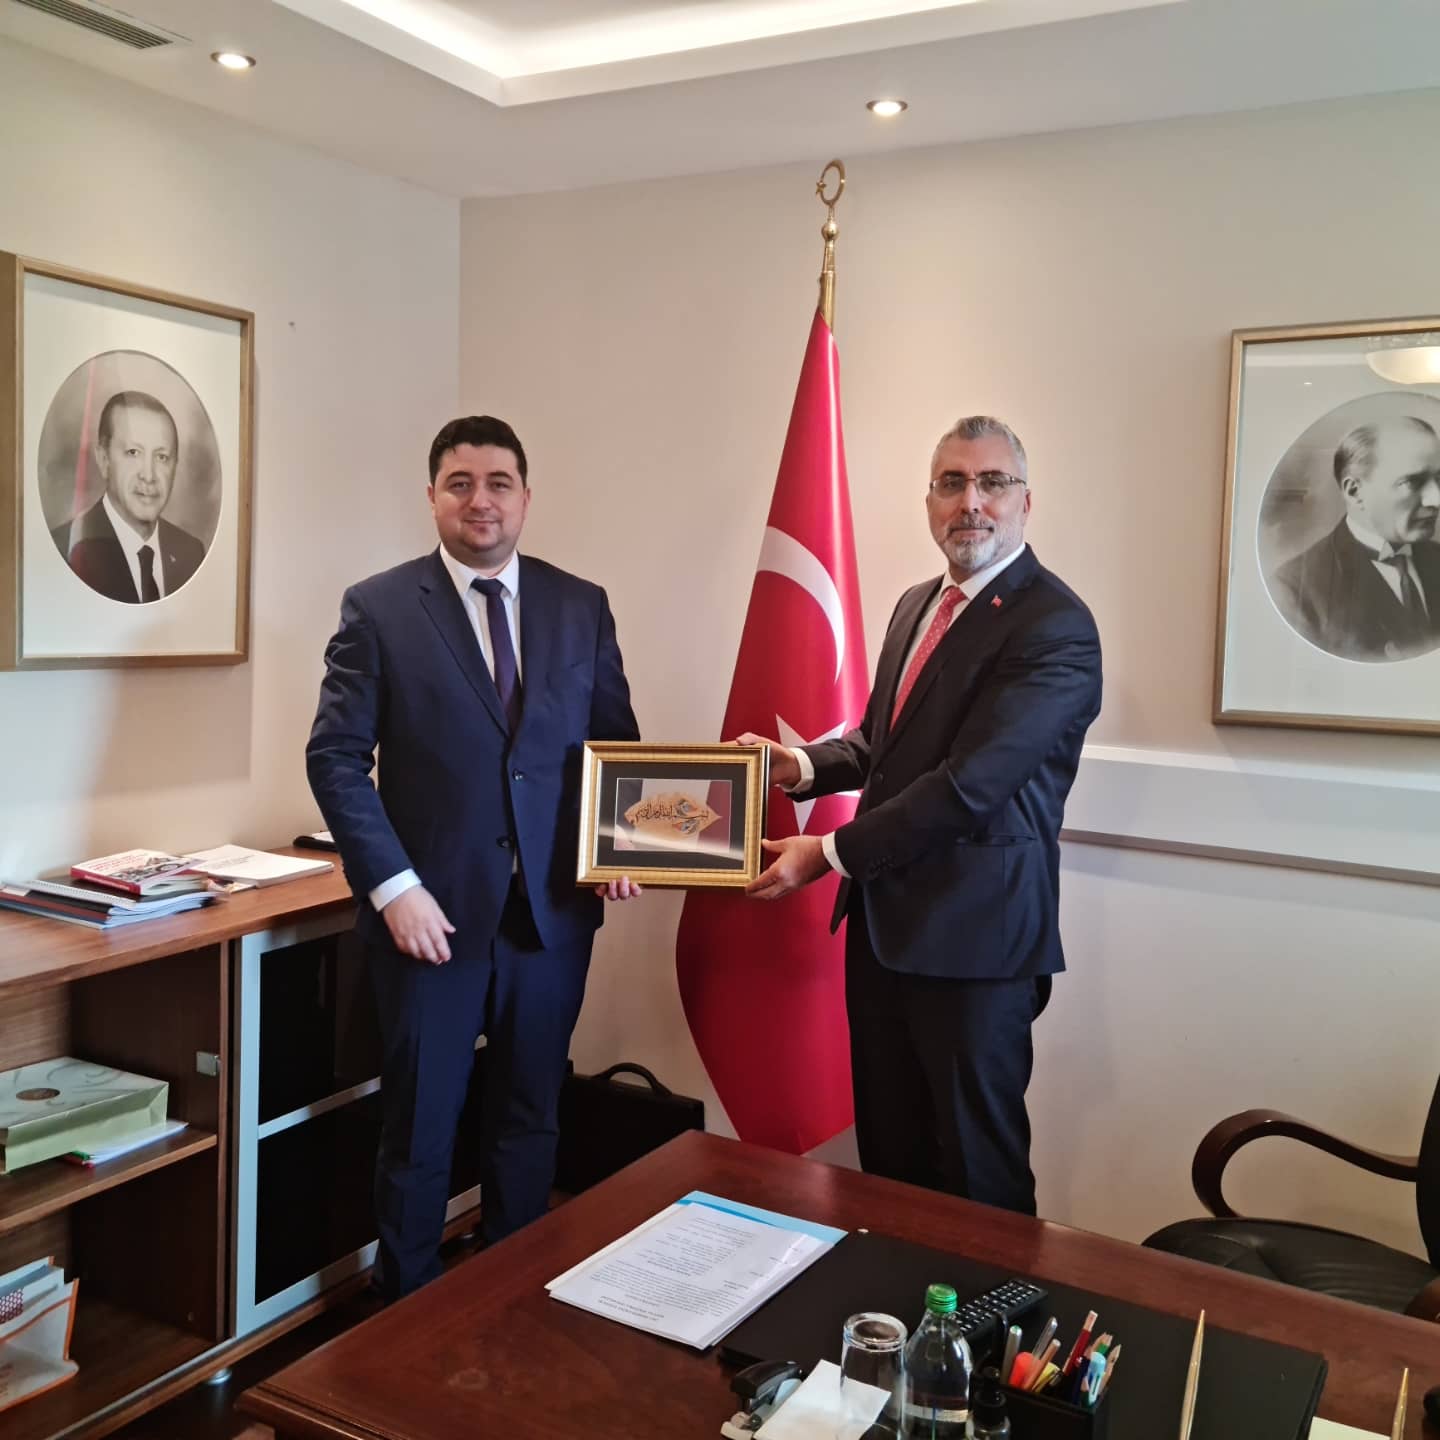 T.C. Chairman of the Presidential Social Policy Committee Prof. Dr. Visit to Vedat ISIKHAN